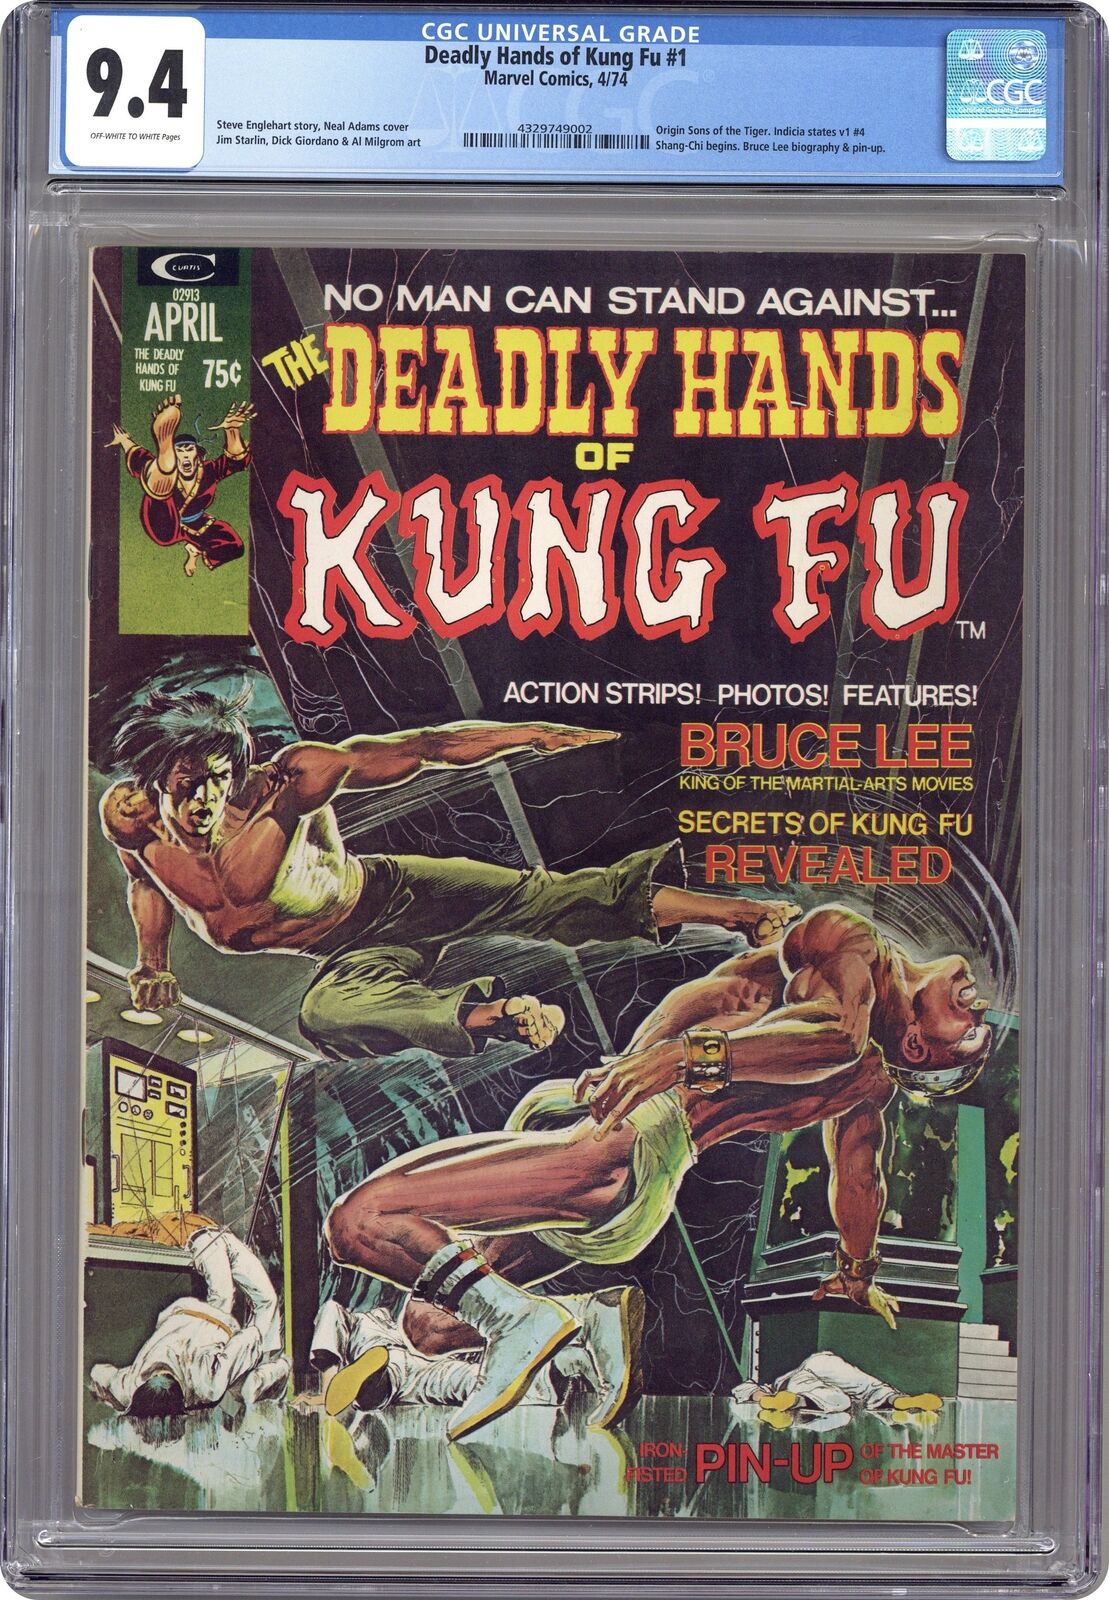 Deadly Hands of Kung Fu #1 CGC 9.4 1974 4329749002